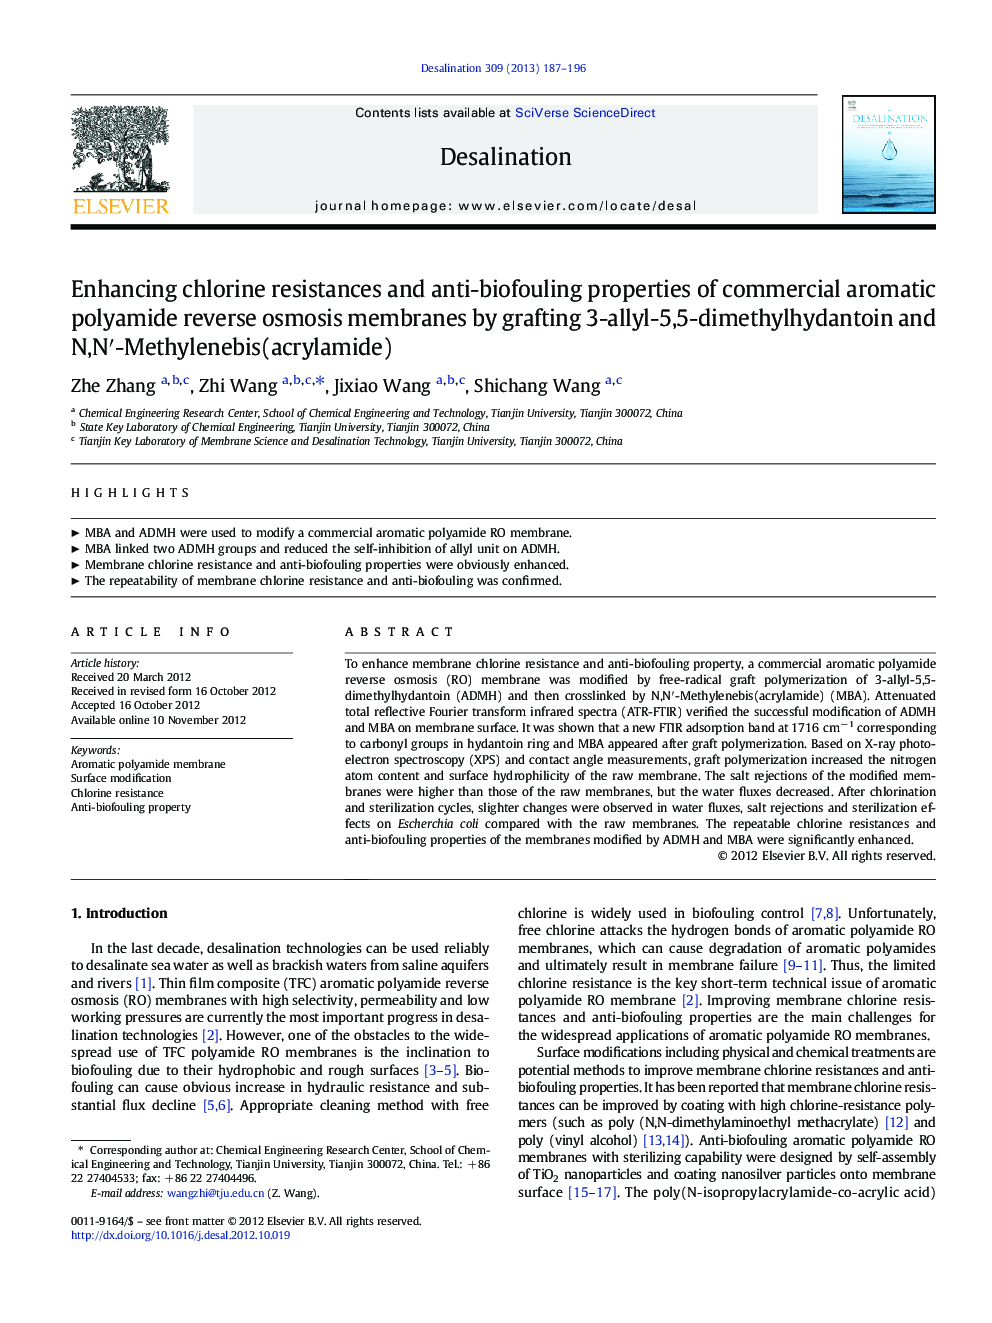 Enhancing chlorine resistances and anti-biofouling properties of commercial aromatic polyamide reverse osmosis membranes by grafting 3-allyl-5,5-dimethylhydantoin and N,Nâ²-Methylenebis(acrylamide)